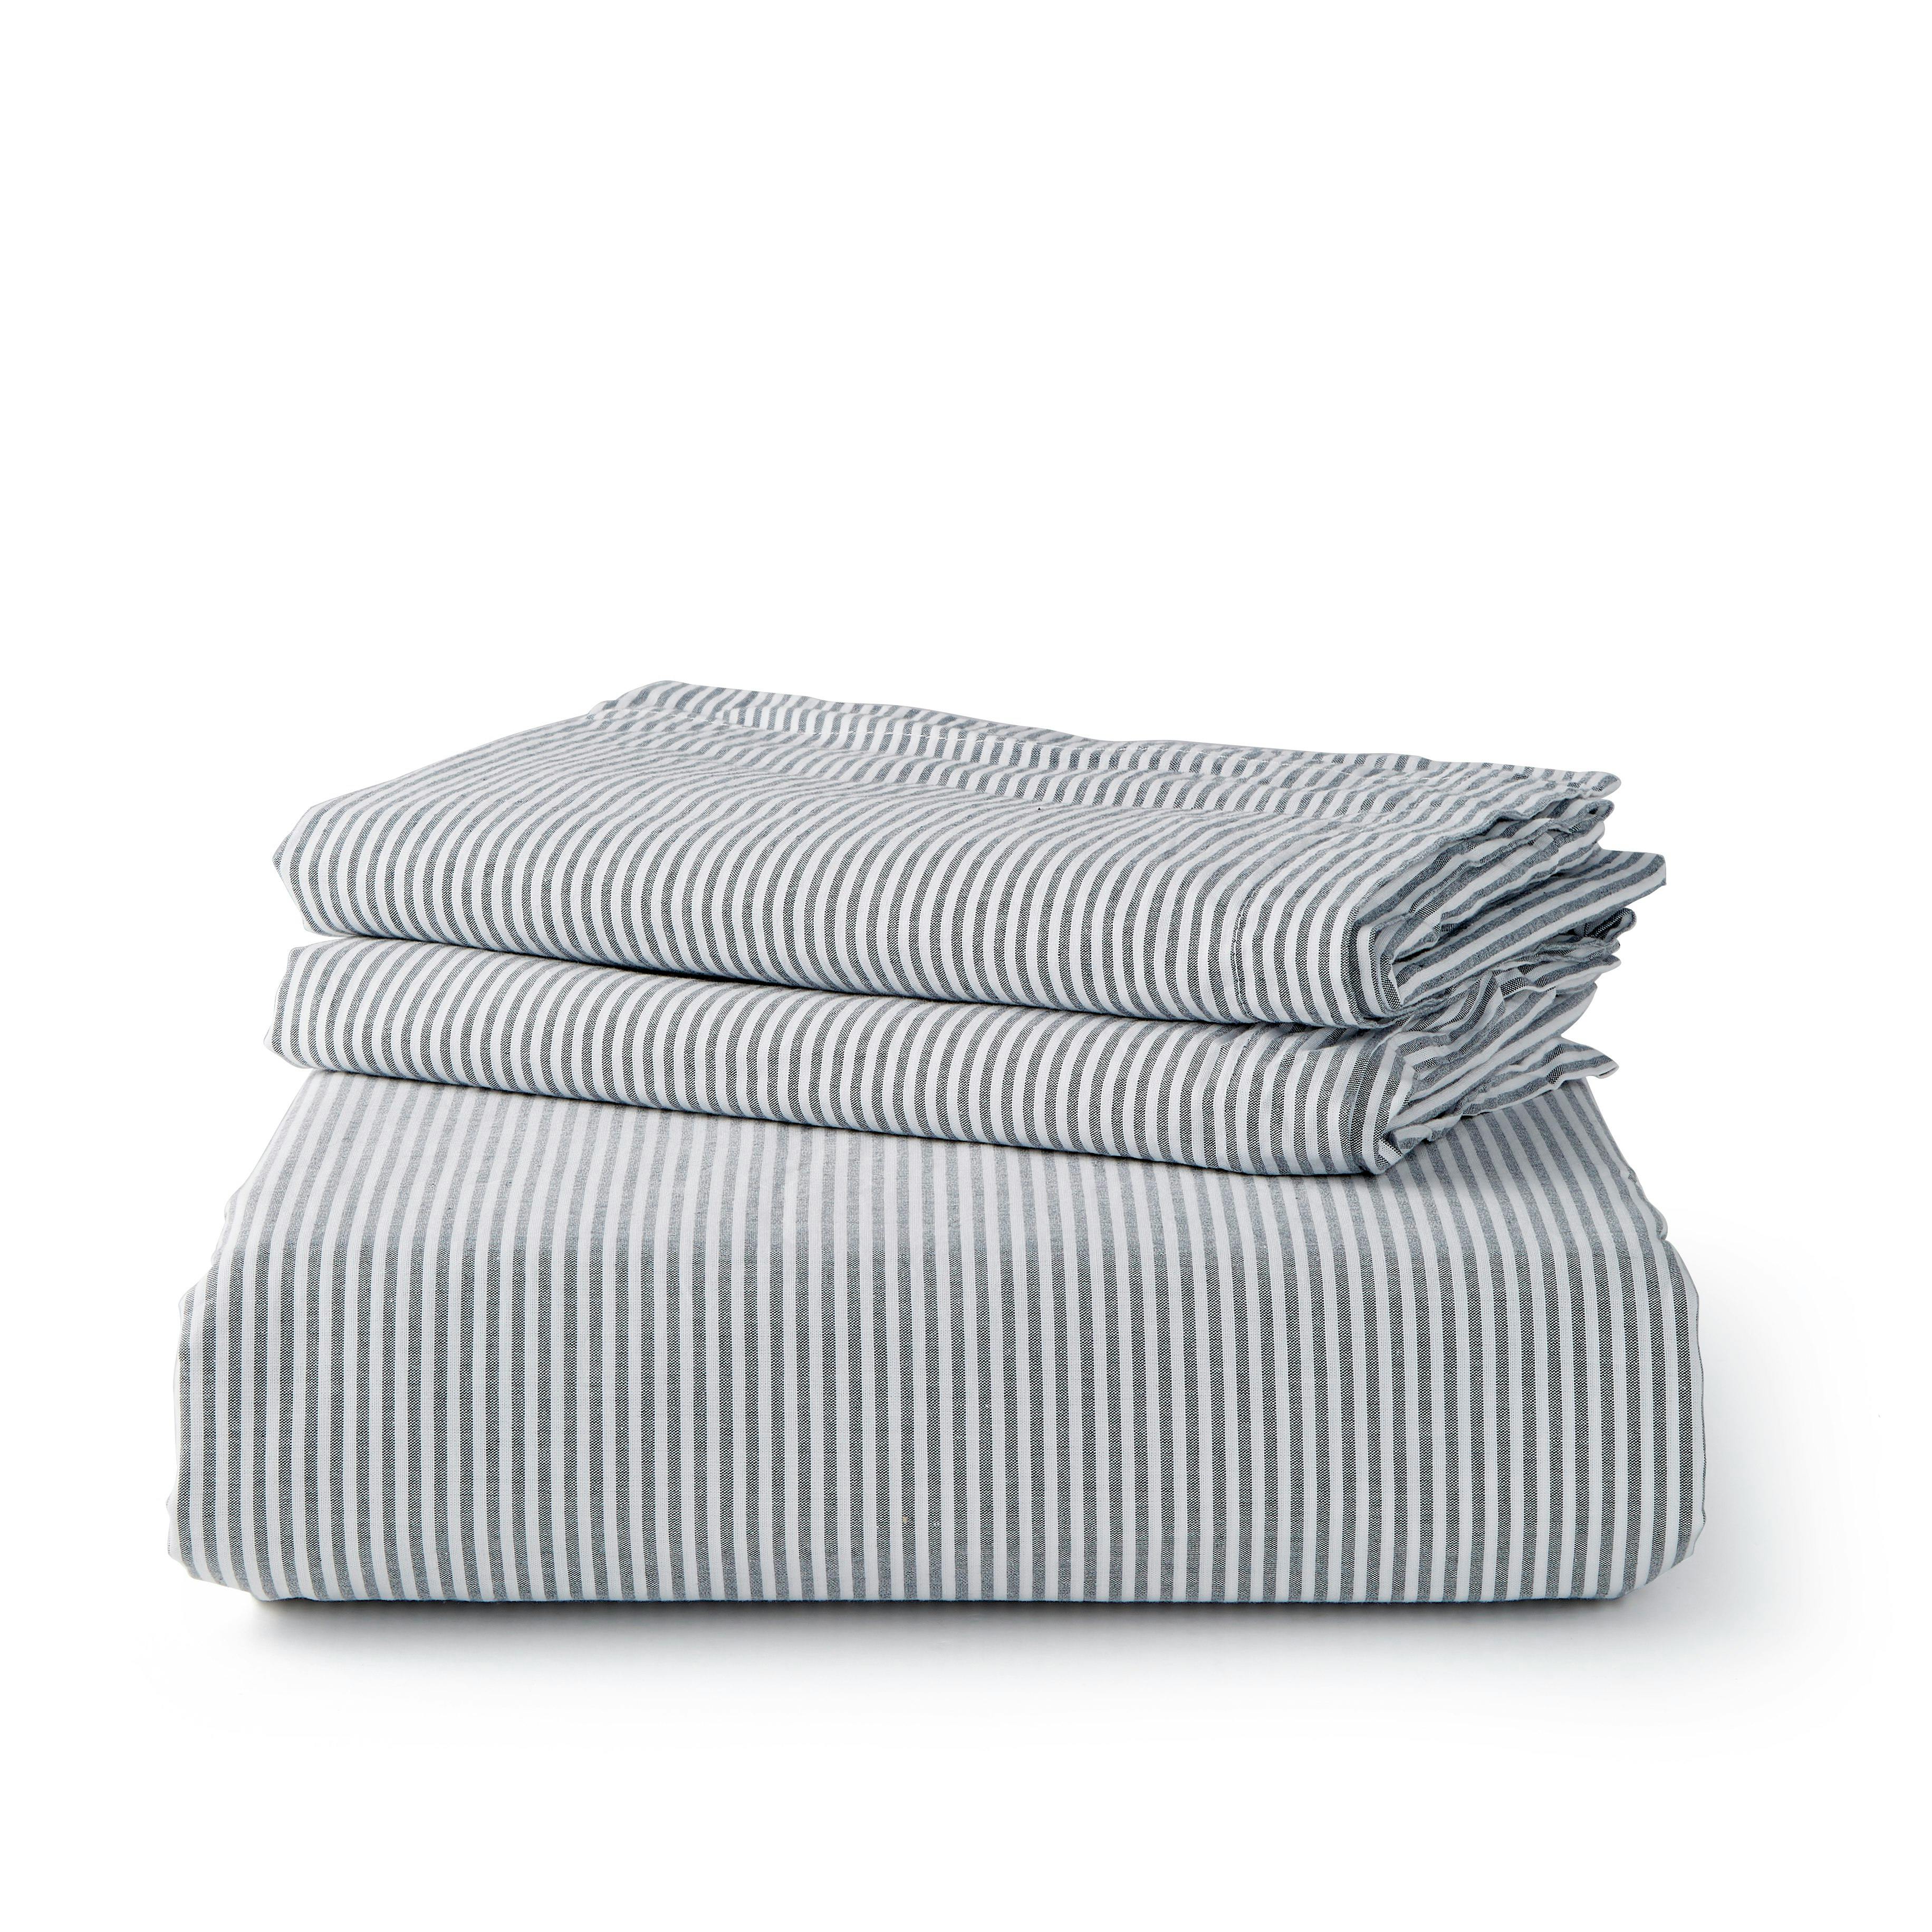 Washed Percale Duvet Set - Queen